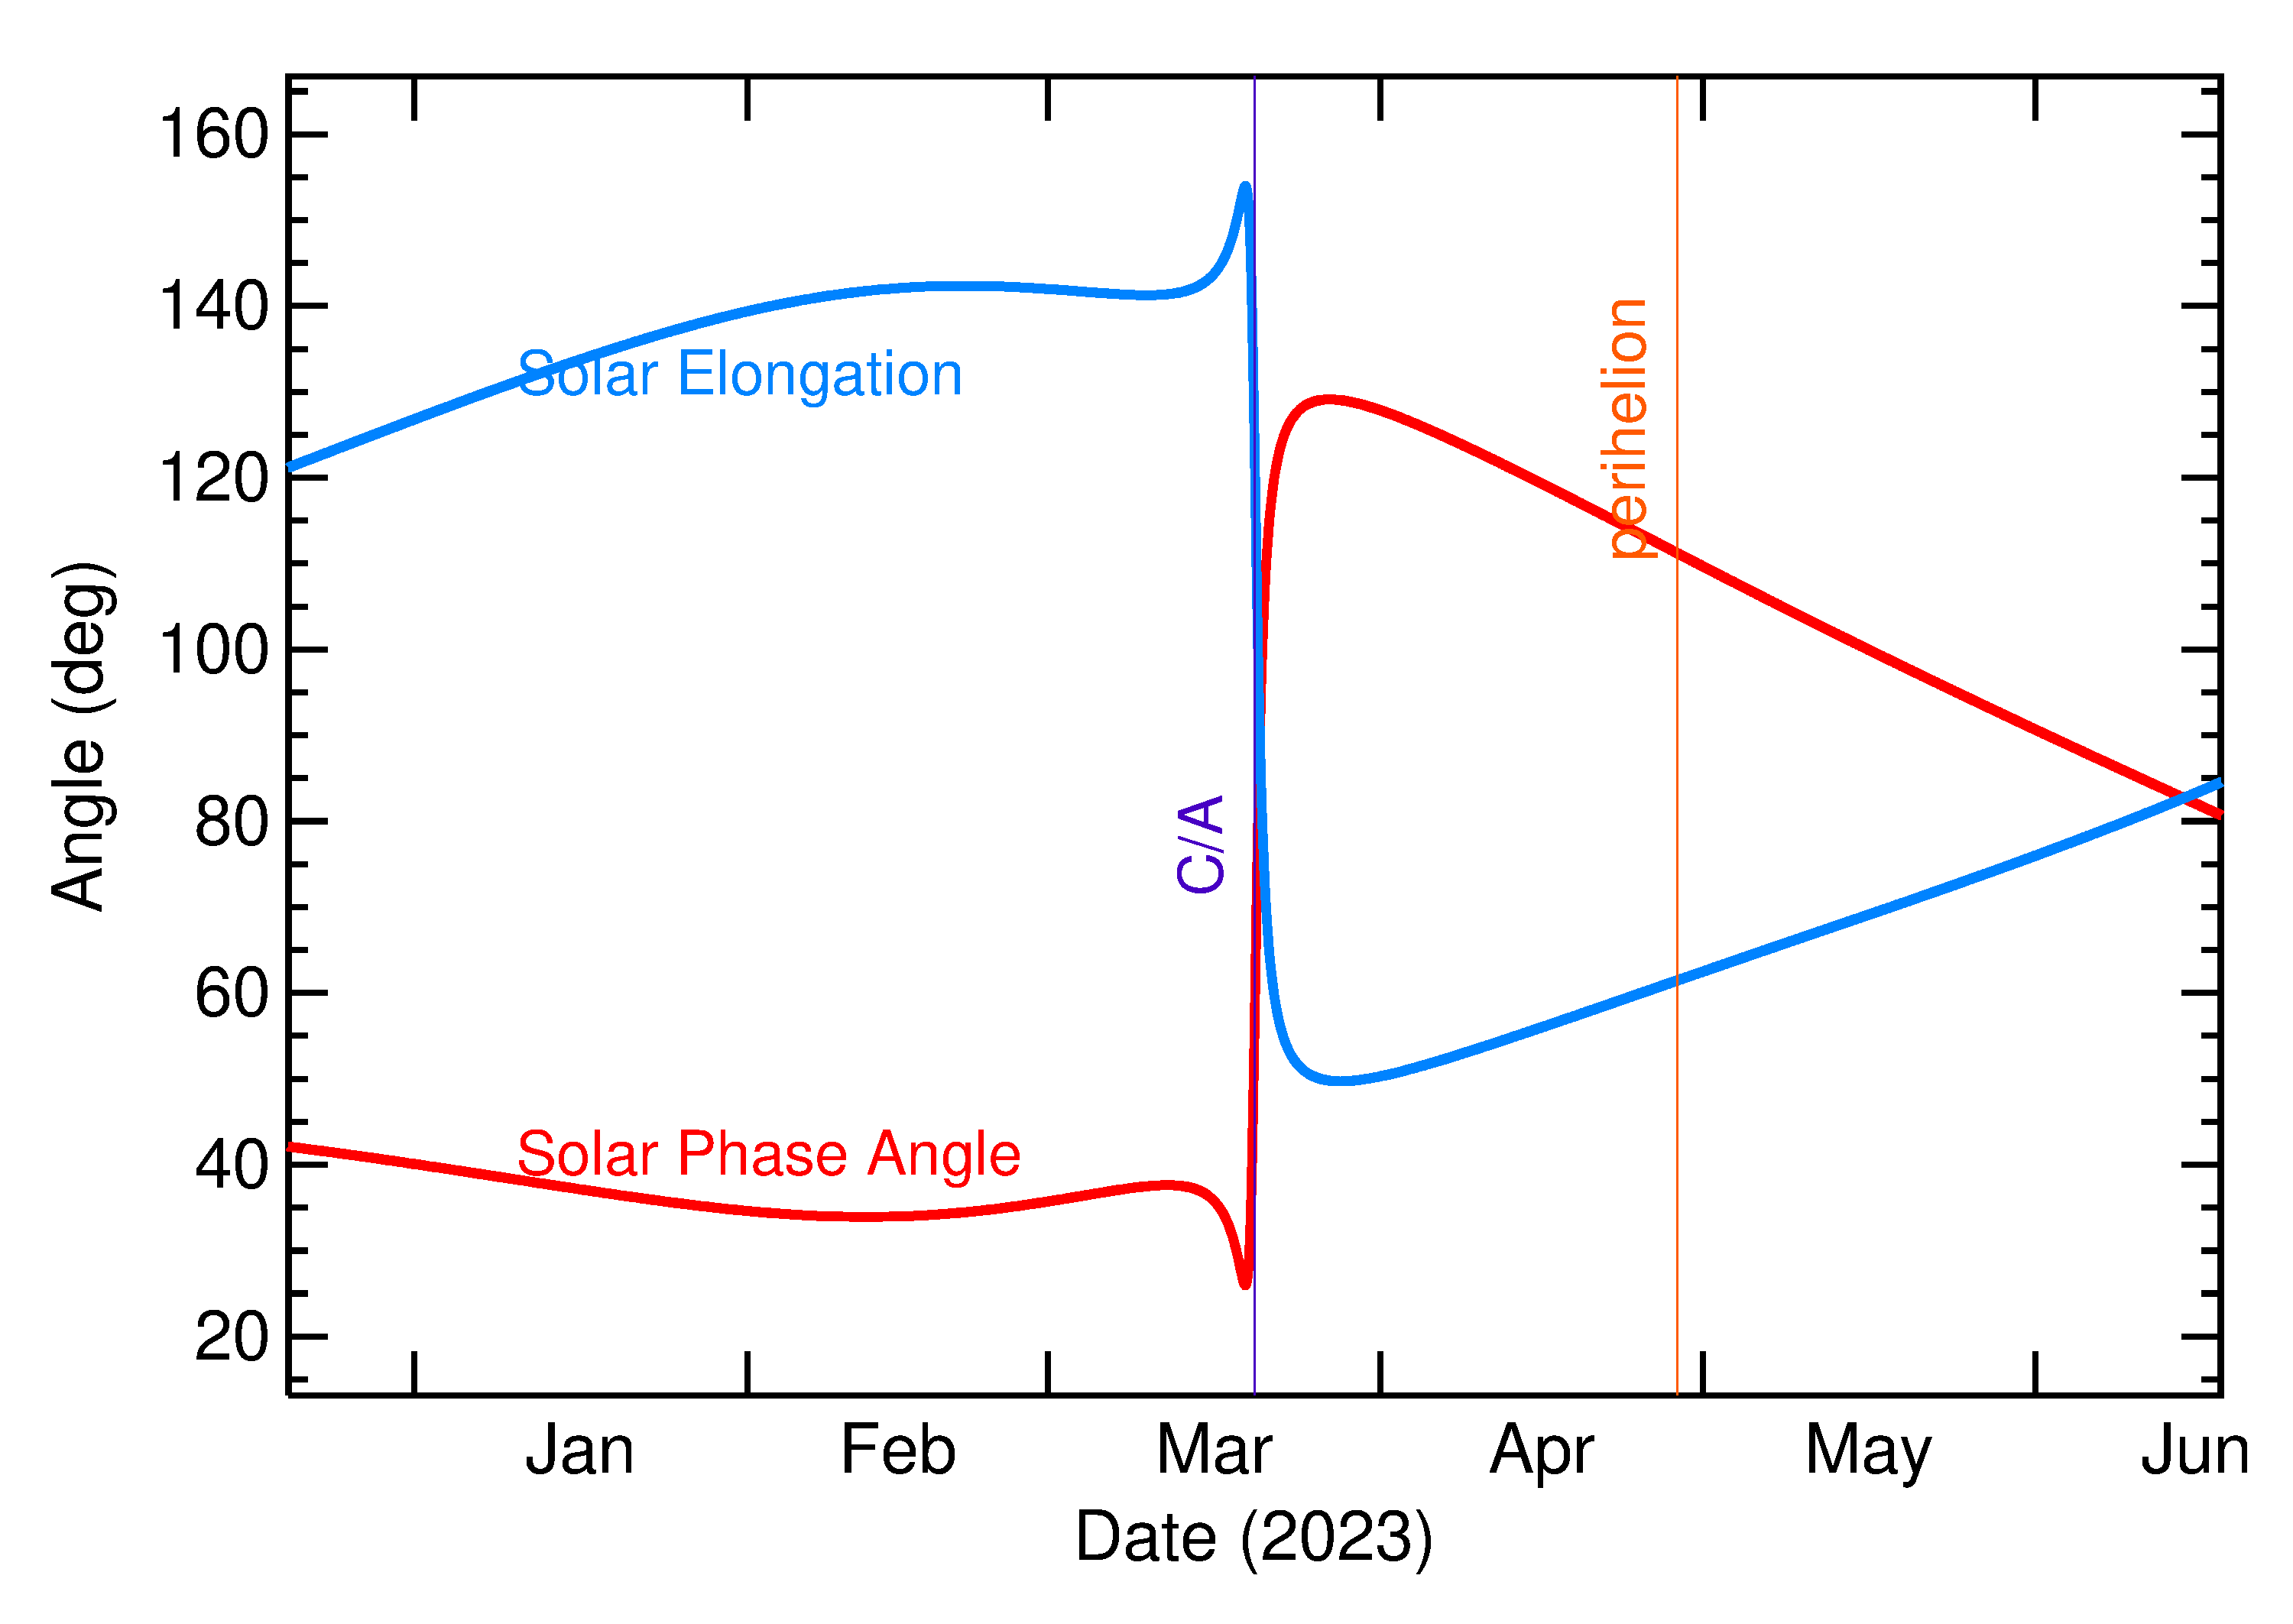 Solar Elongation and Solar Phase Angle of 2023 FO in the months around closest approach